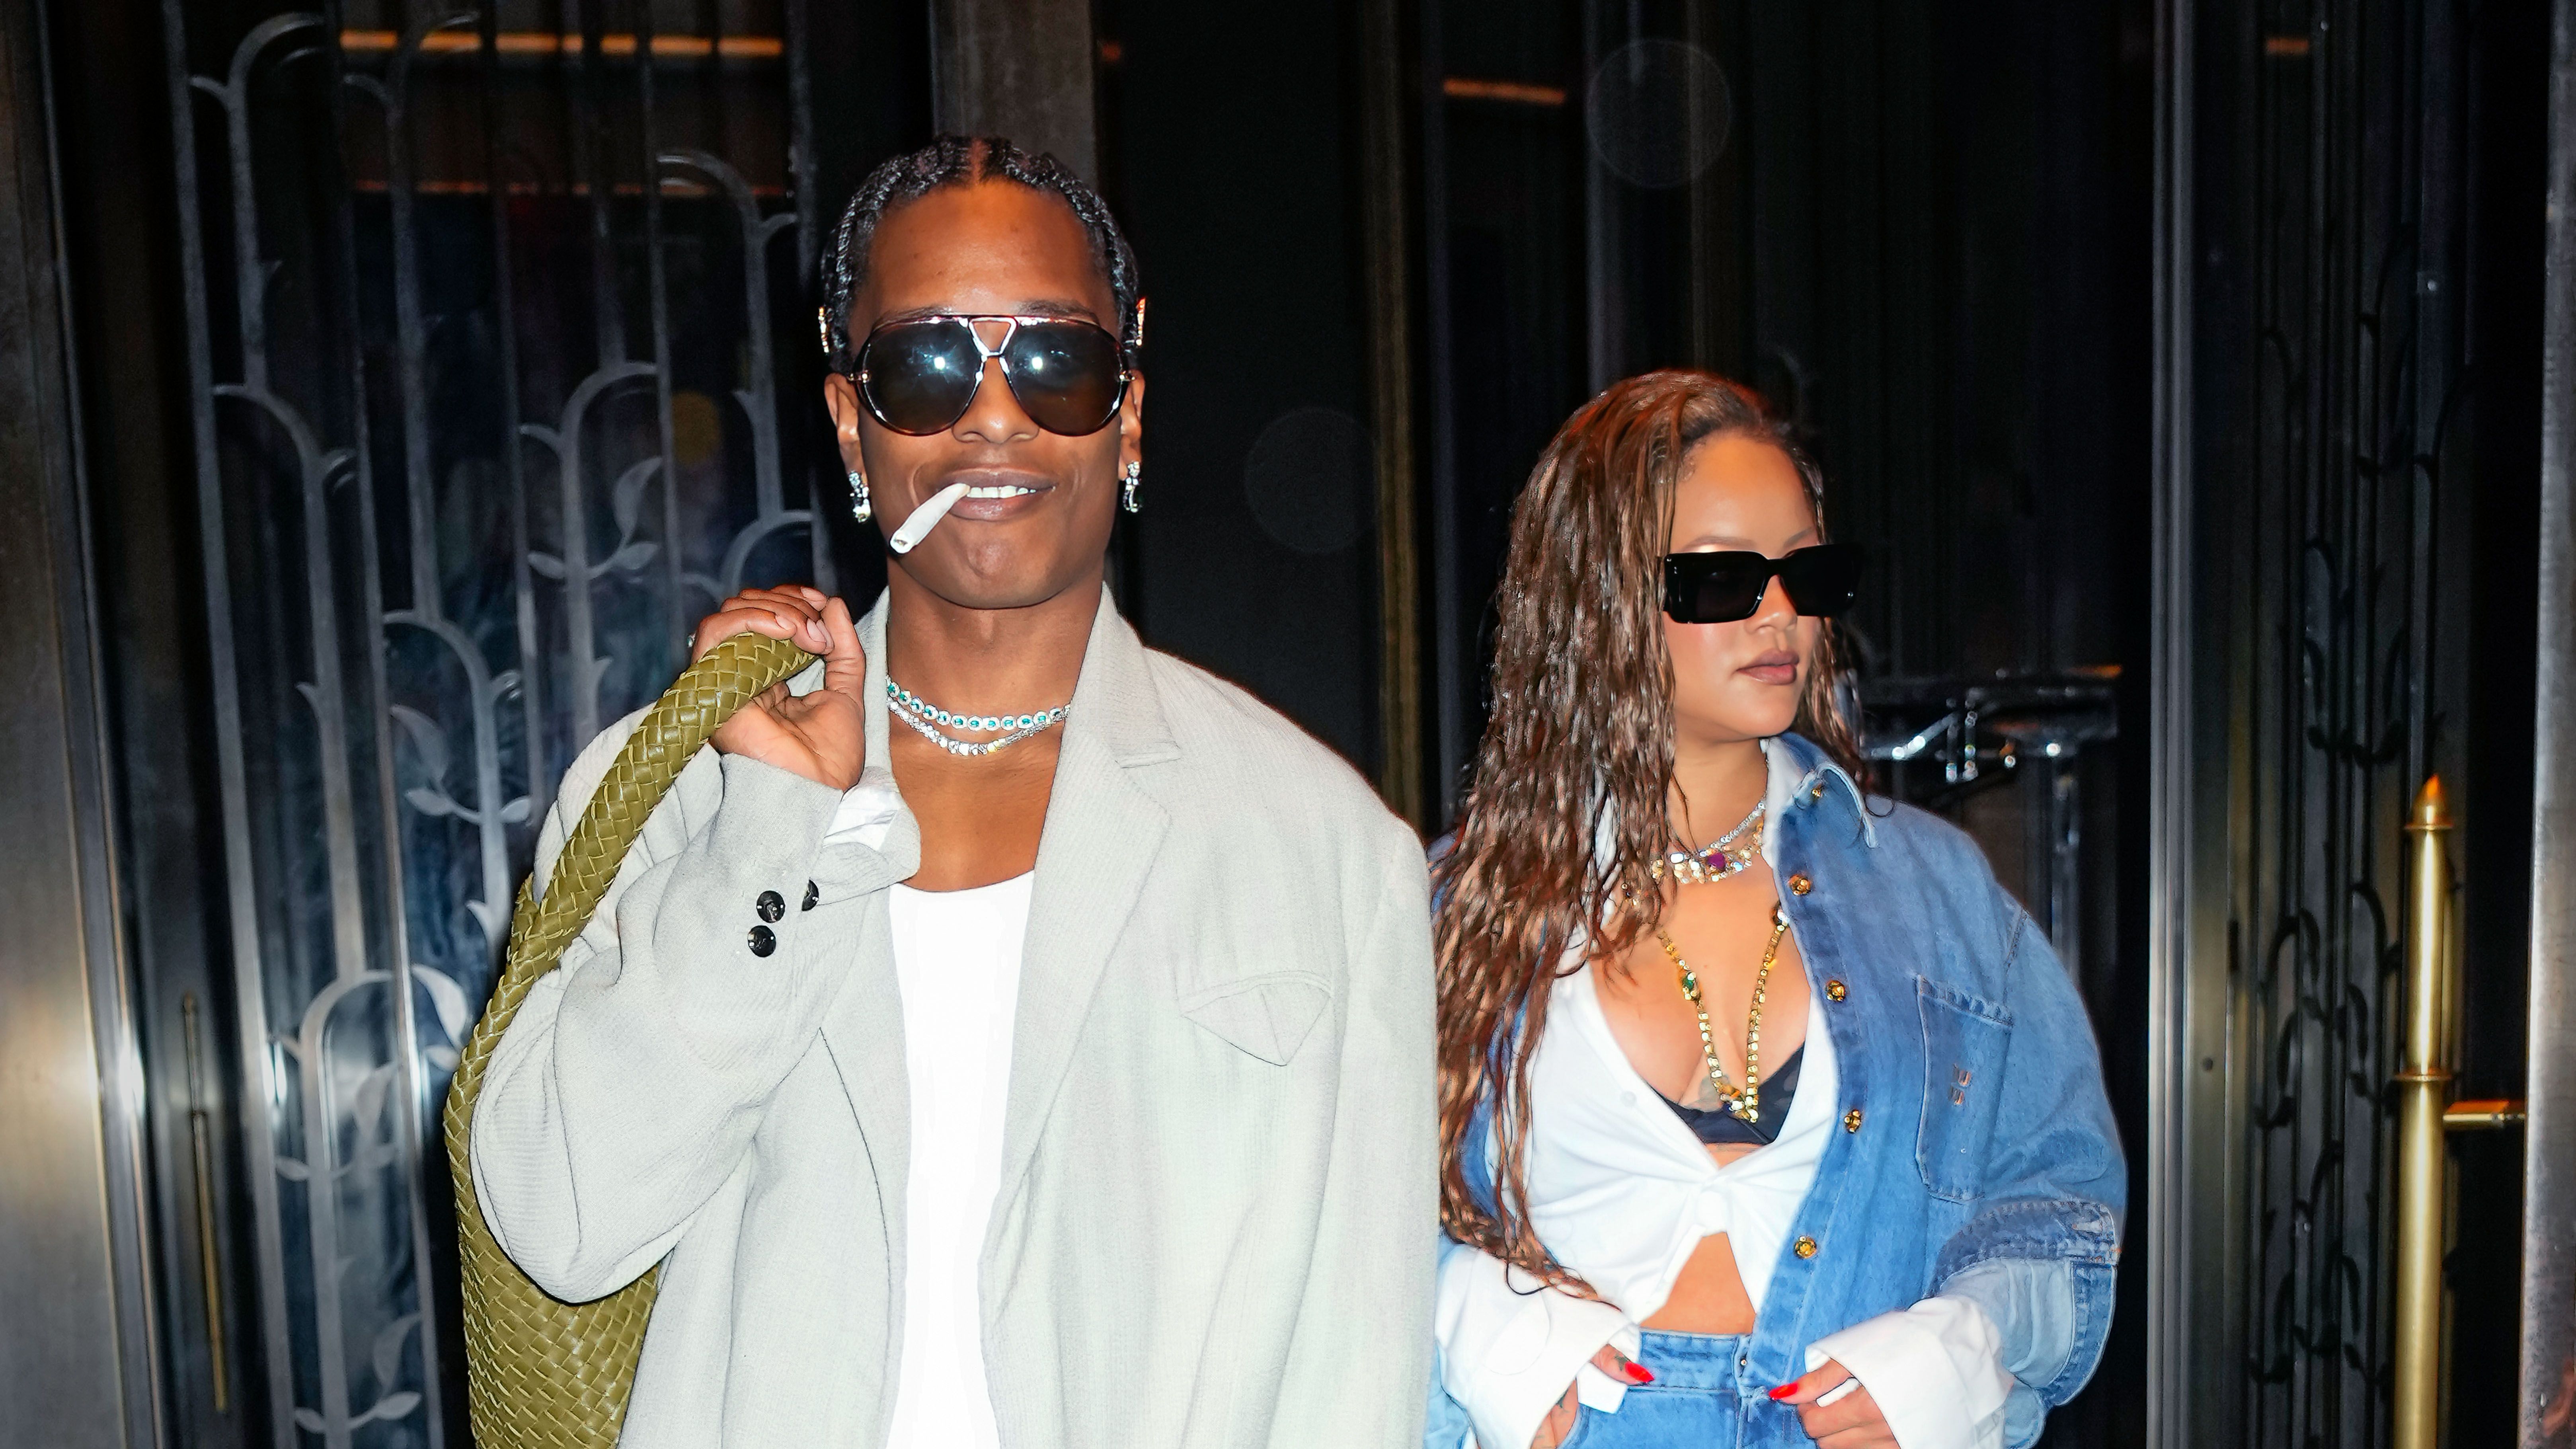 Rihanna's Date Night Outfit Included A Cone Bra Corset From Jean